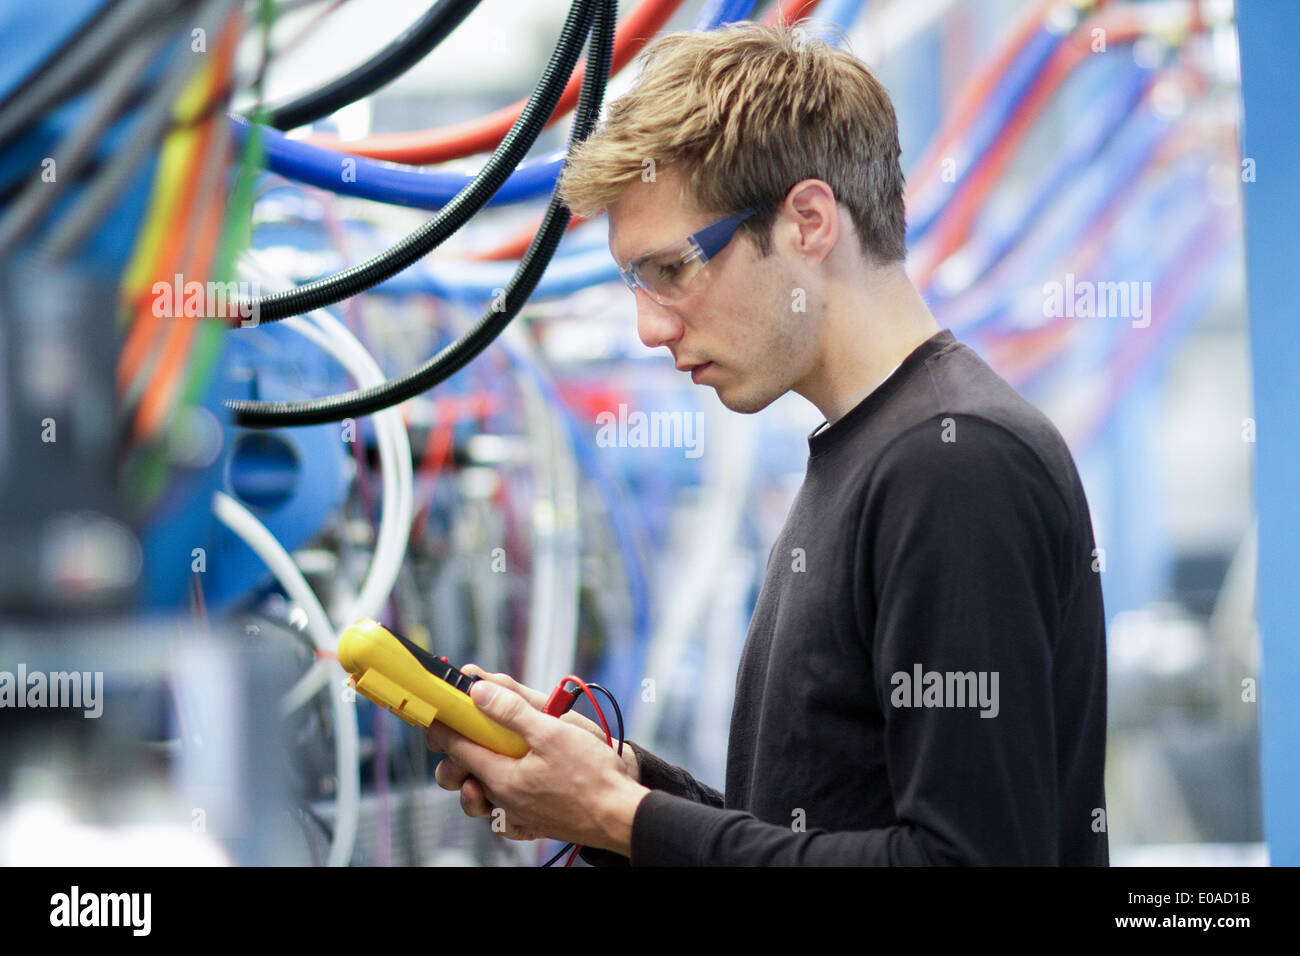 Mid adult male technician testing cables in engineering plant Stock Photo